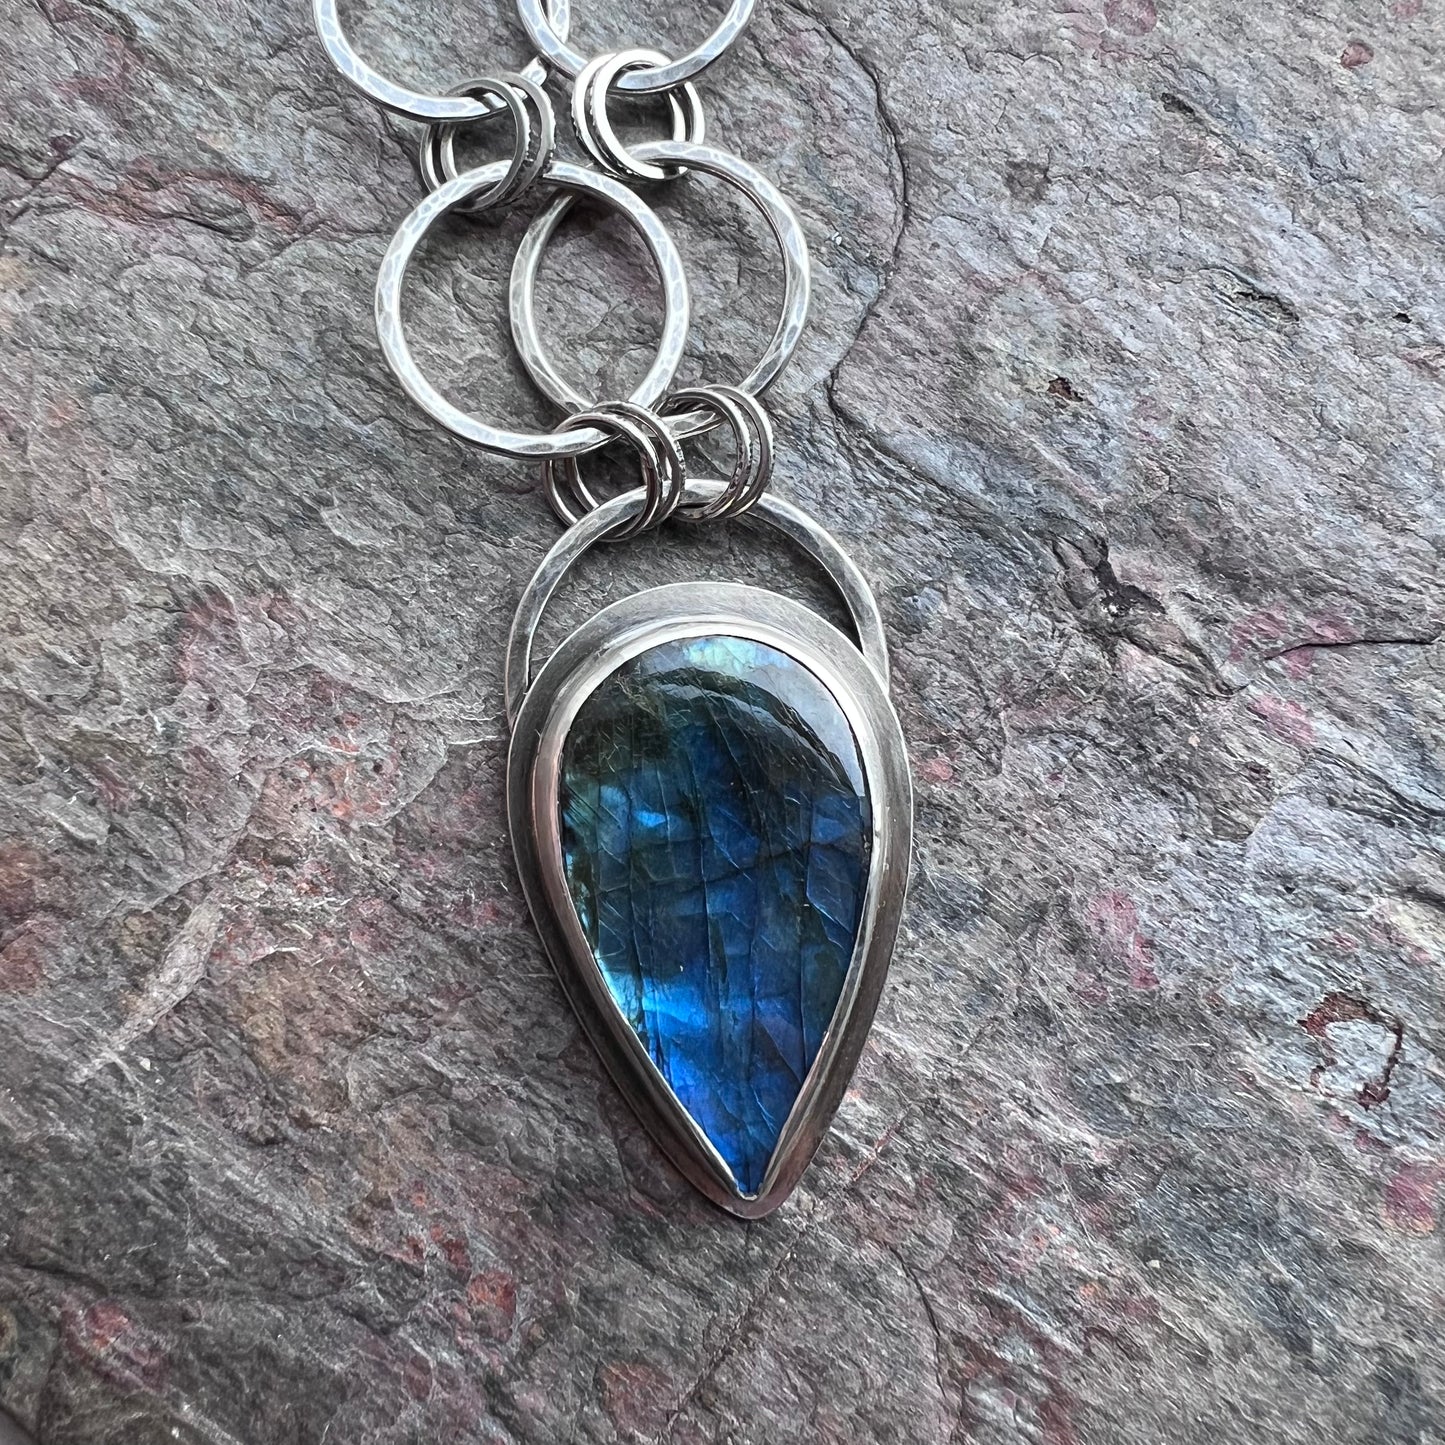 Labradorite Sterling Silver Necklace - Handmade One-of-a-kind Pendant on Hammered Ring Chain